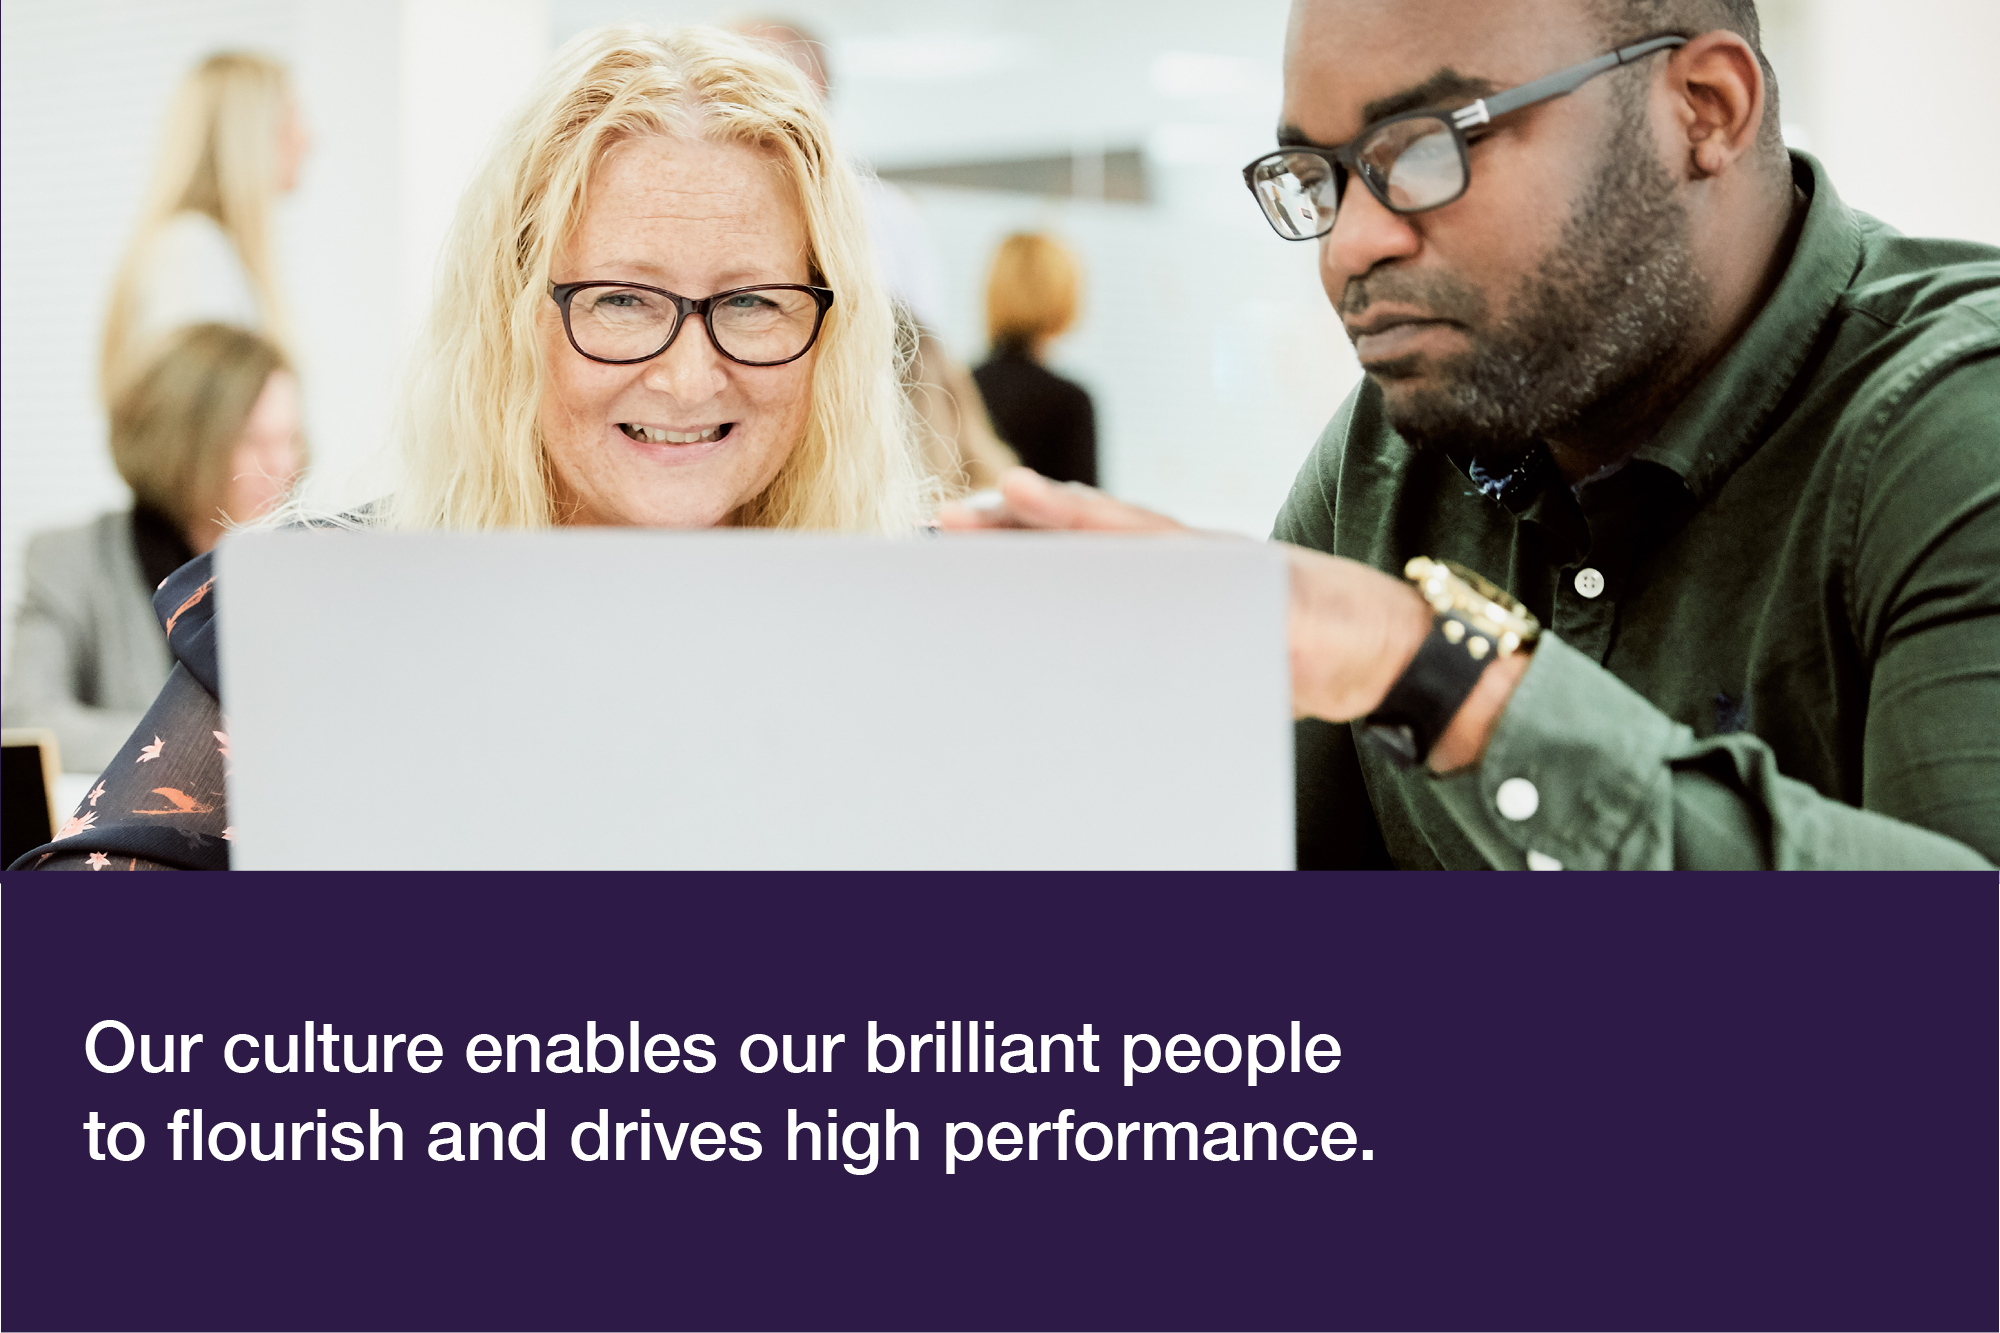 Our culture enables our brilliant people to flourish and drives high performance.